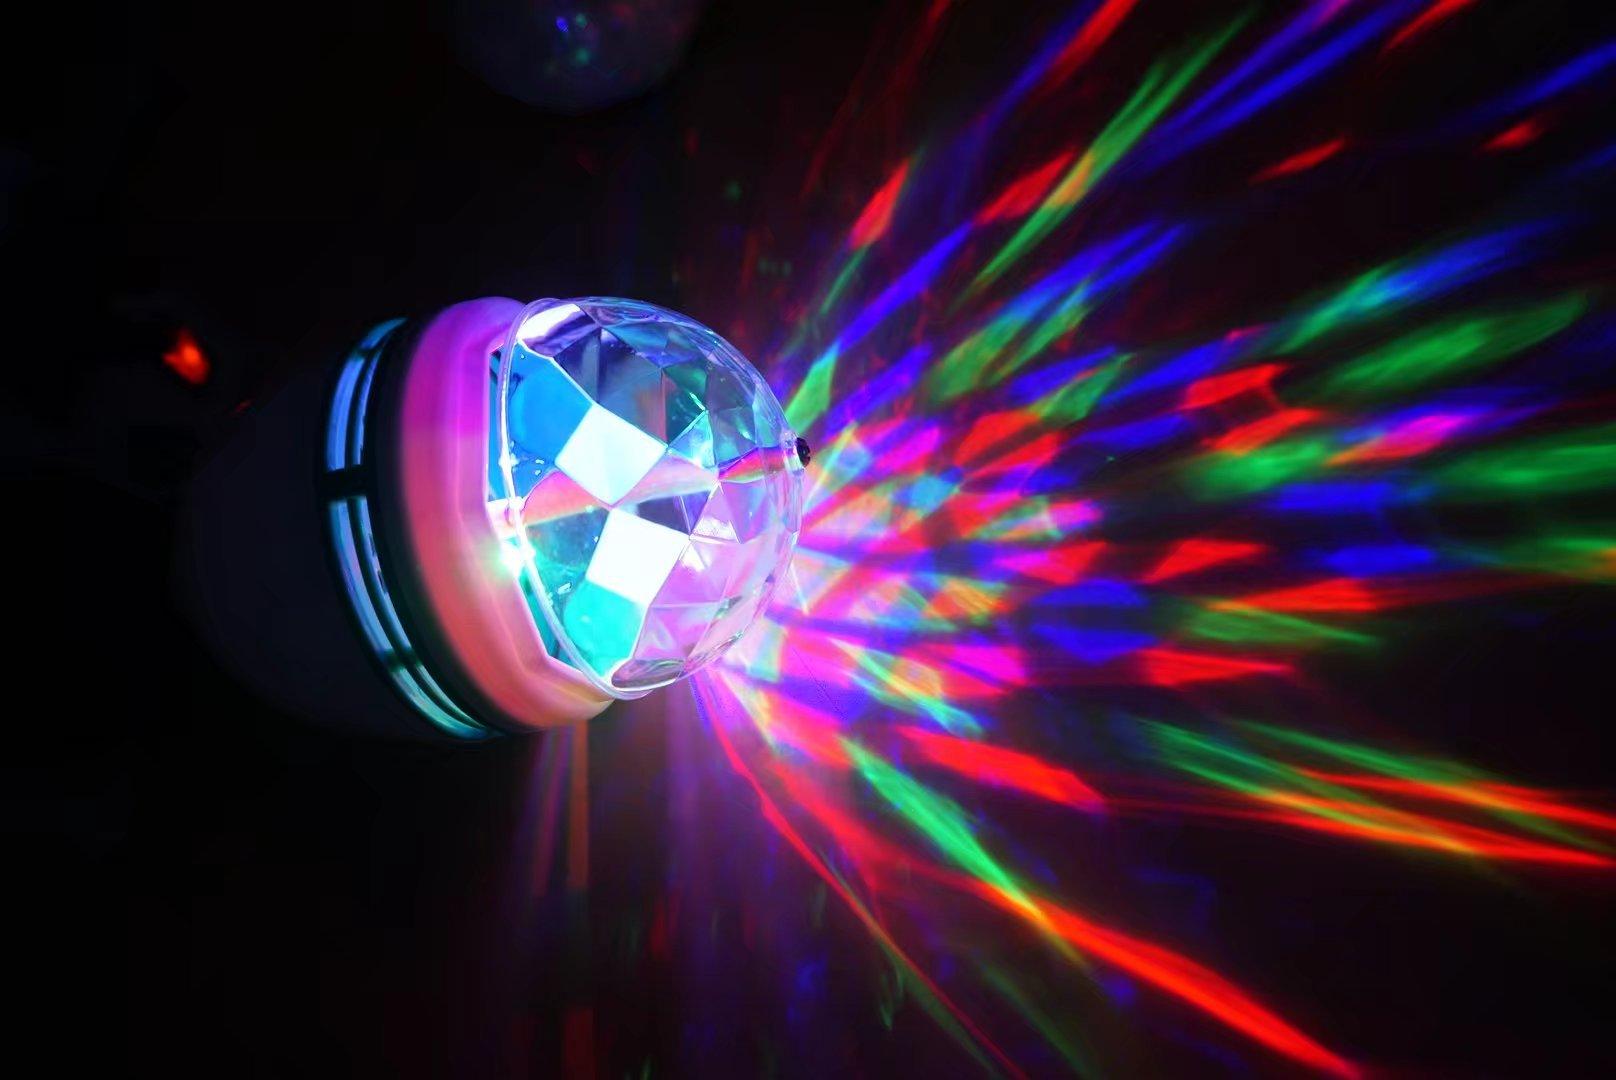 Full Colors Rotating Disco Party Light with Plug Adapter freeshipping - Dealz4all Store